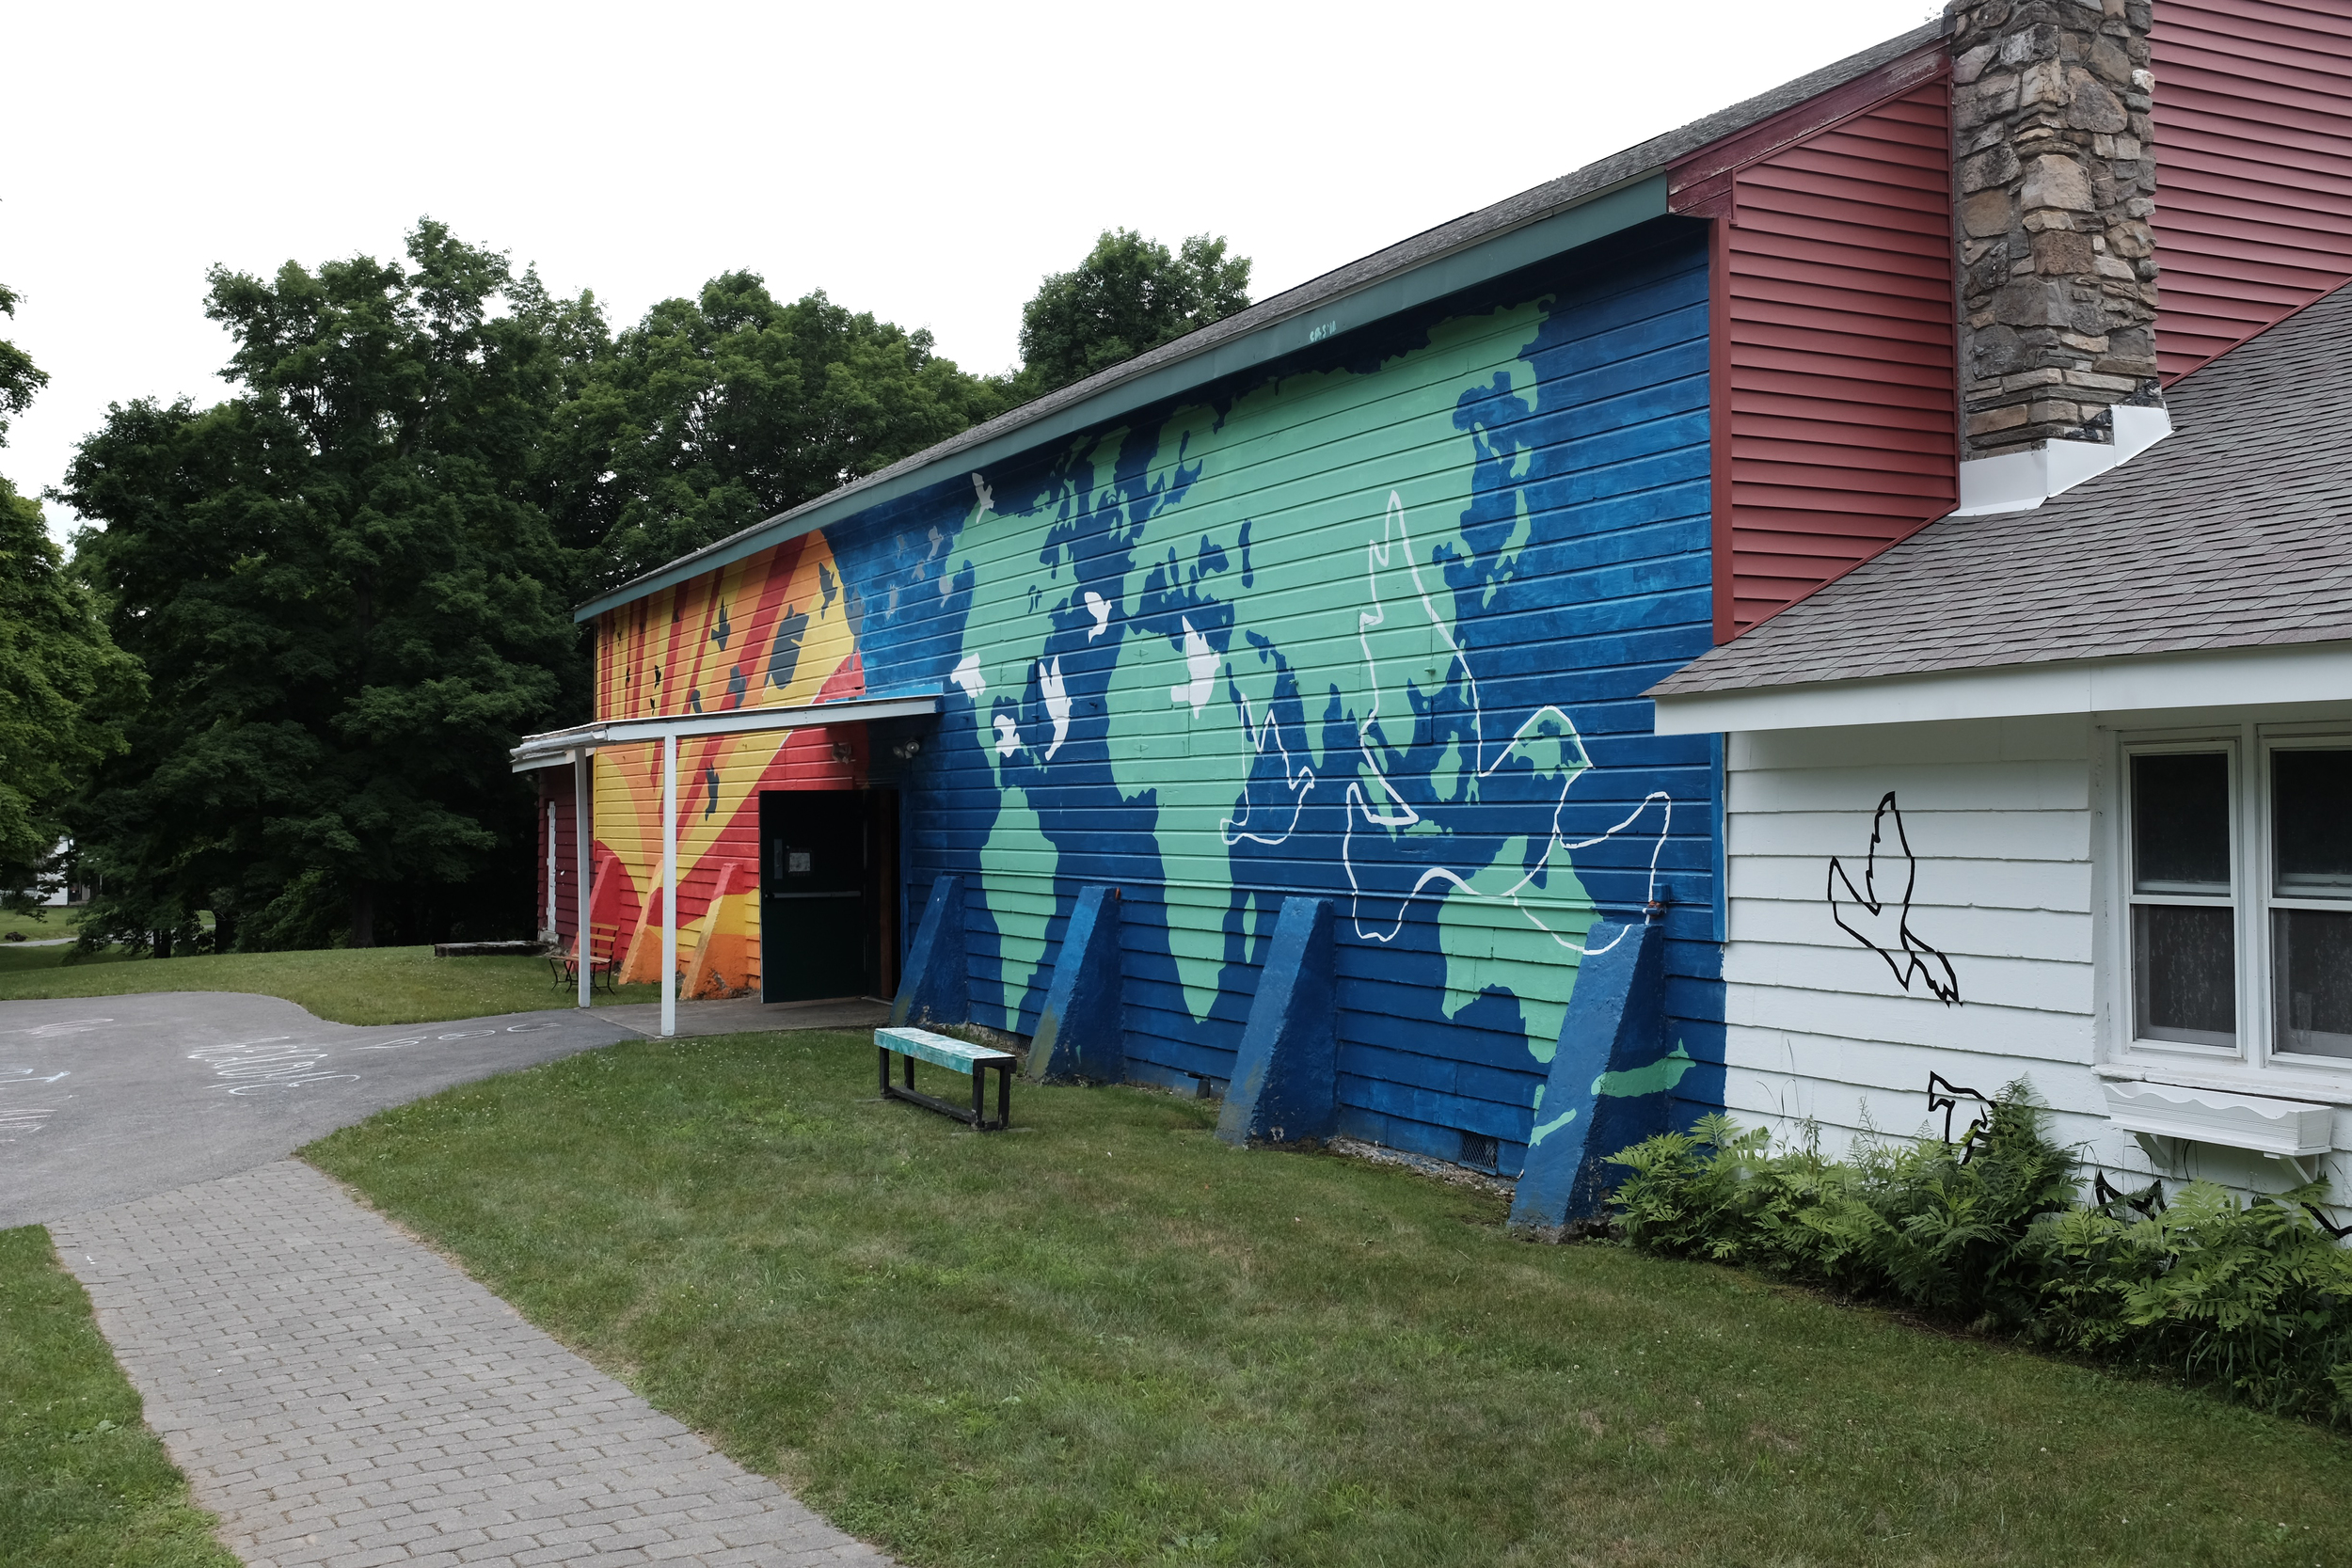  The campus covers about 100 acres in historic Rhinebeck, NY. Pictured here is Main Building, which houses an indoor gym, the dining hall, bathrooms, and a campers' lounge. The mural on the side was painted by campers. 